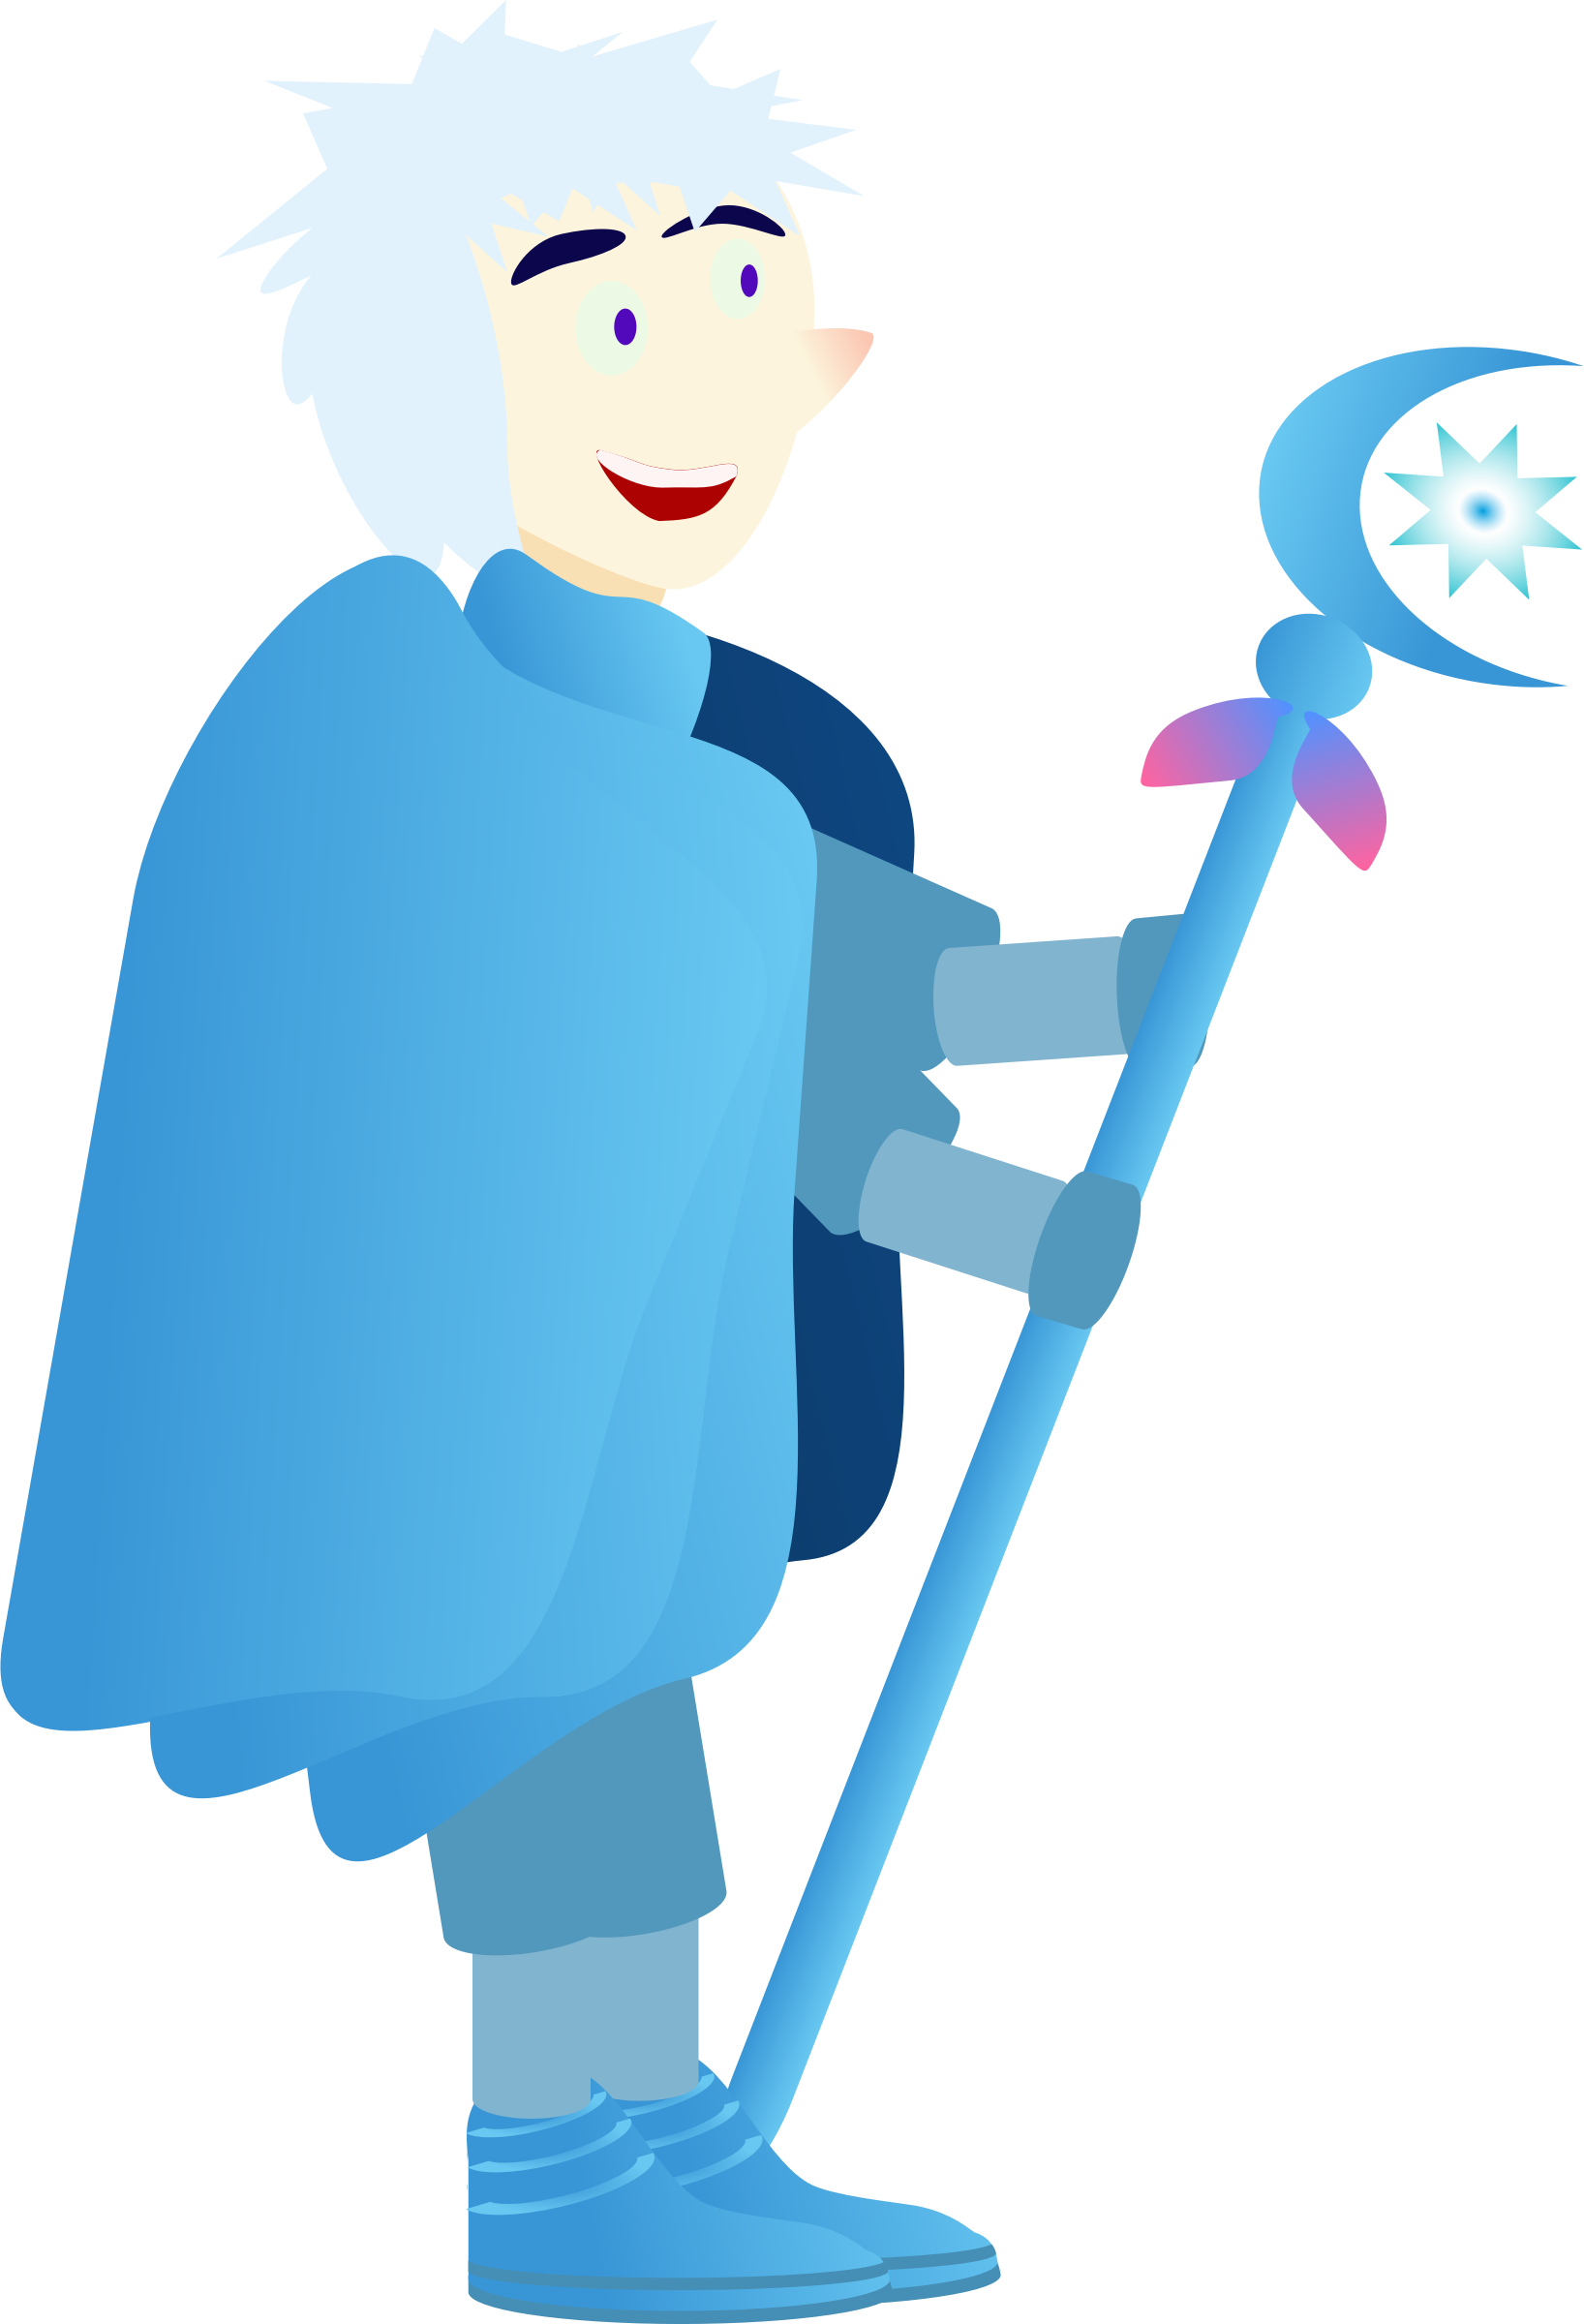 janitor clipart cleanness